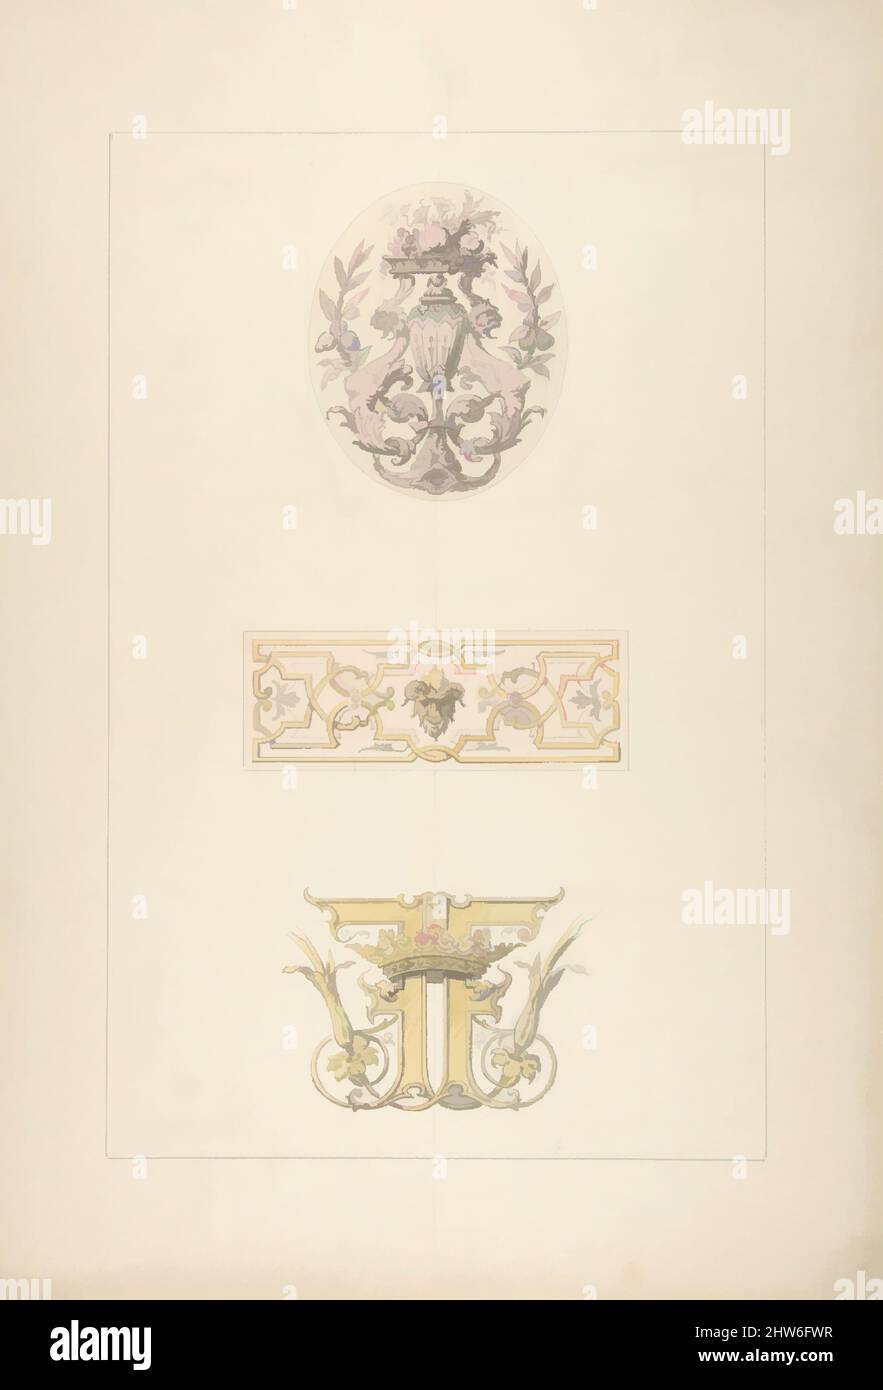 Art inspired by Two designs for decorative panels and one design for an ornamental monogram with a crown and the initials: FF, 1830–97, Watercolor and graphite, sheet: 19 1/2 x 13 3/8 in. (49.5 x 33.9 cm), Drawings, Jules-Edmond-Charles Lachaise (French, died 1897), Eugène-Pierre, Classic works modernized by Artotop with a splash of modernity. Shapes, color and value, eye-catching visual impact on art. Emotions through freedom of artworks in a contemporary way. A timeless message pursuing a wildly creative new direction. Artists turning to the digital medium and creating the Artotop NFT Stock Photo